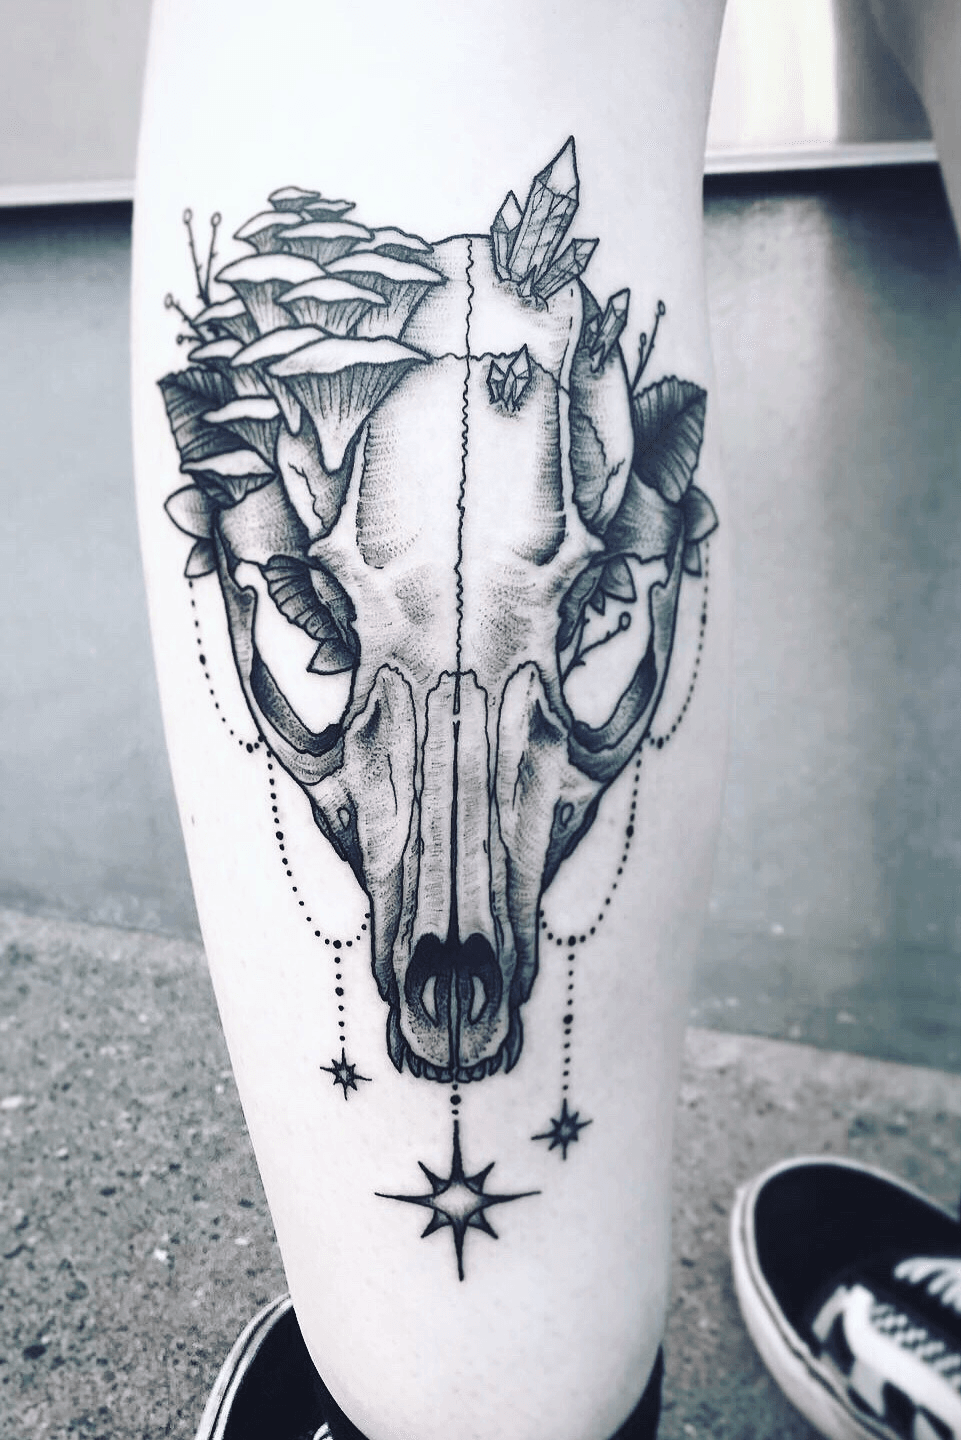 Out of Step Books  Gallery  Loving this rad mushroom skull tattoo by  merrytattooer who works at Northgate Tattoo Visit merrytattooer s  page for tons of excellent tattooed treasuresand if you